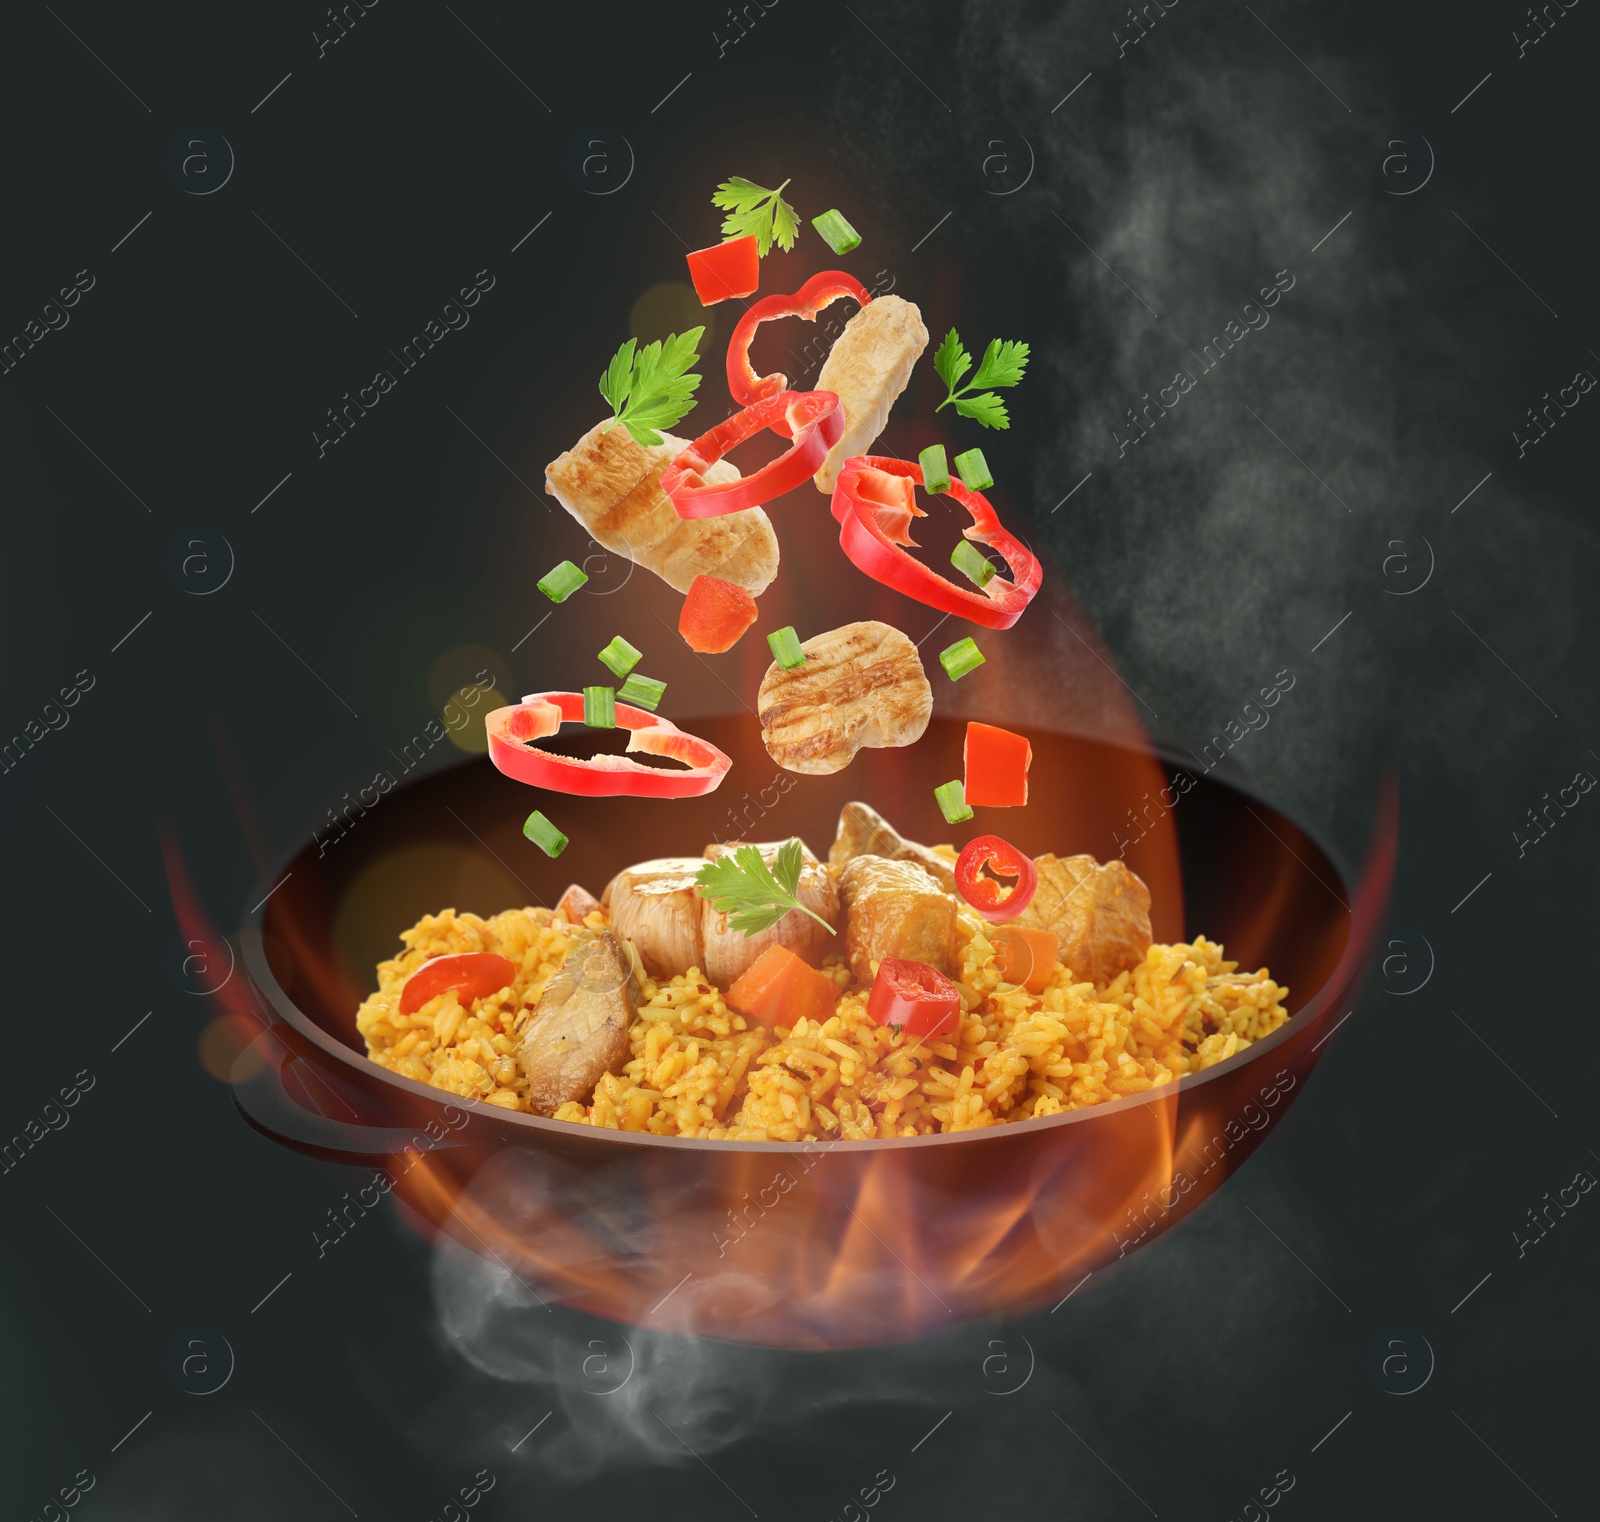 Image of Wok with tasty ingredients and fire on dark background